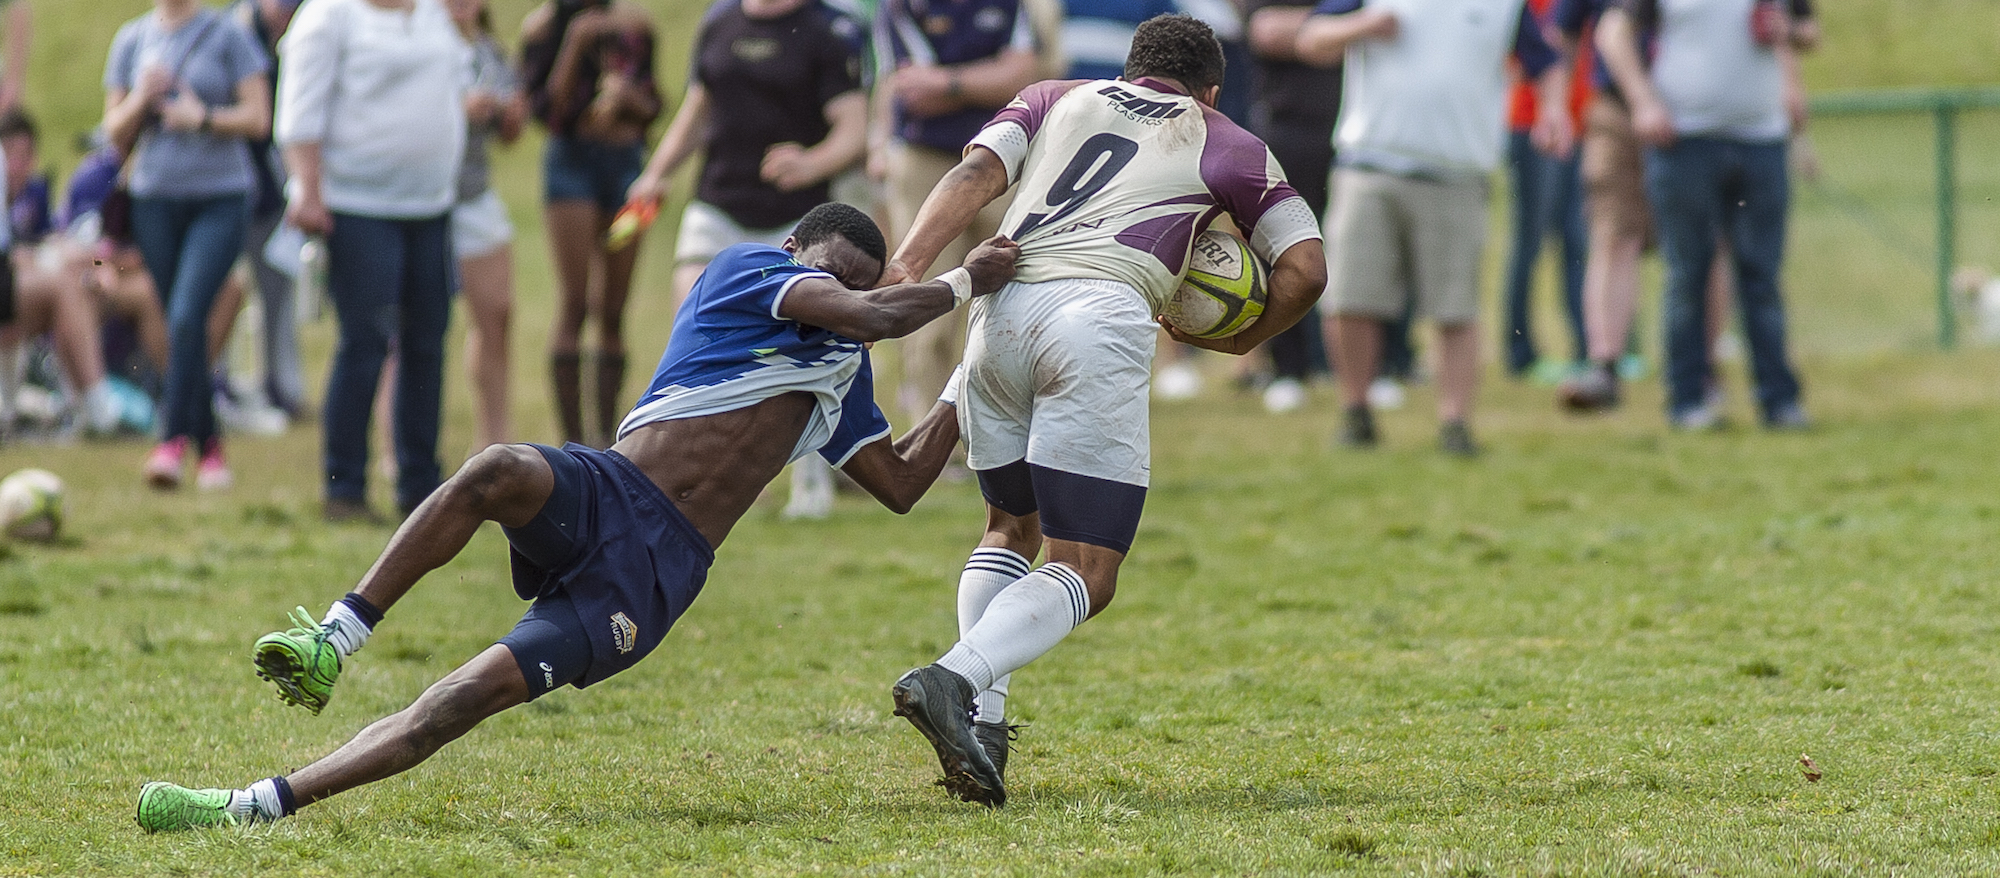 Dmontae Noble in action for Kutztown University Rugby March 25, 2017. Colleen McCloskey photo.